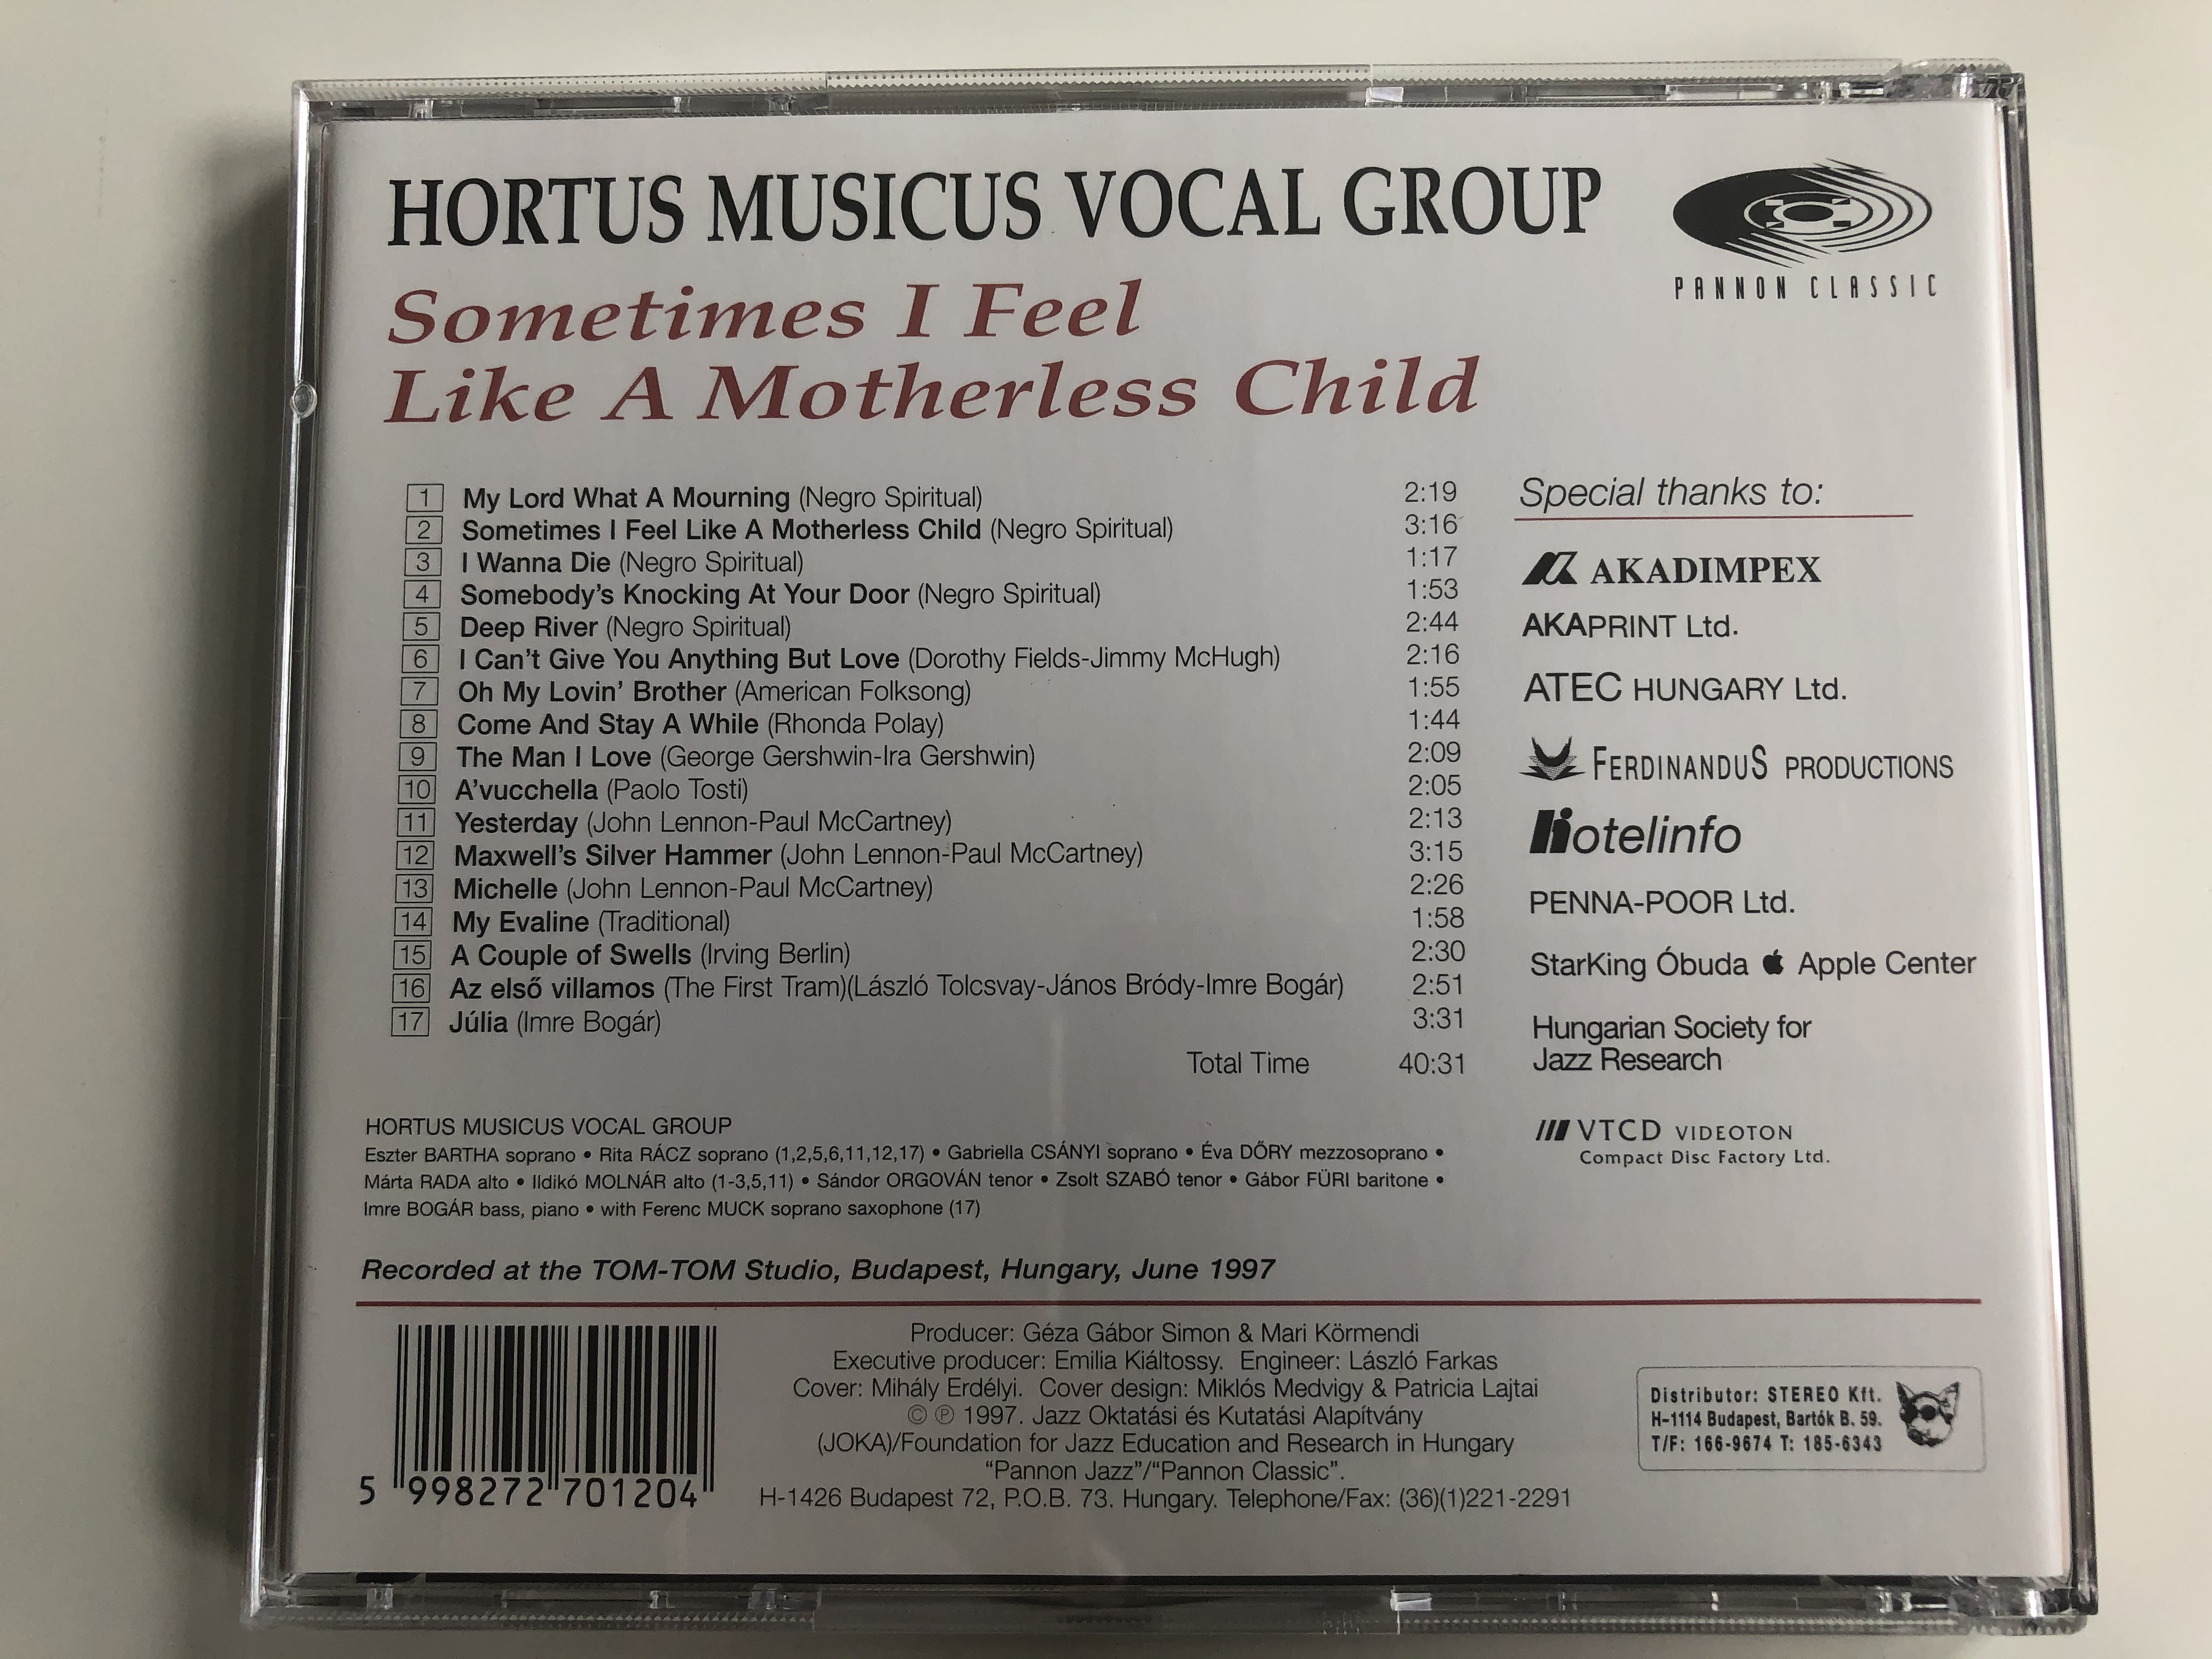 hortus-musicus-vocal-group-sometimes-i-feel-like-a-motherless-child-pannon-classic-audio-cd-1997-pcl-8011-5-.jpg